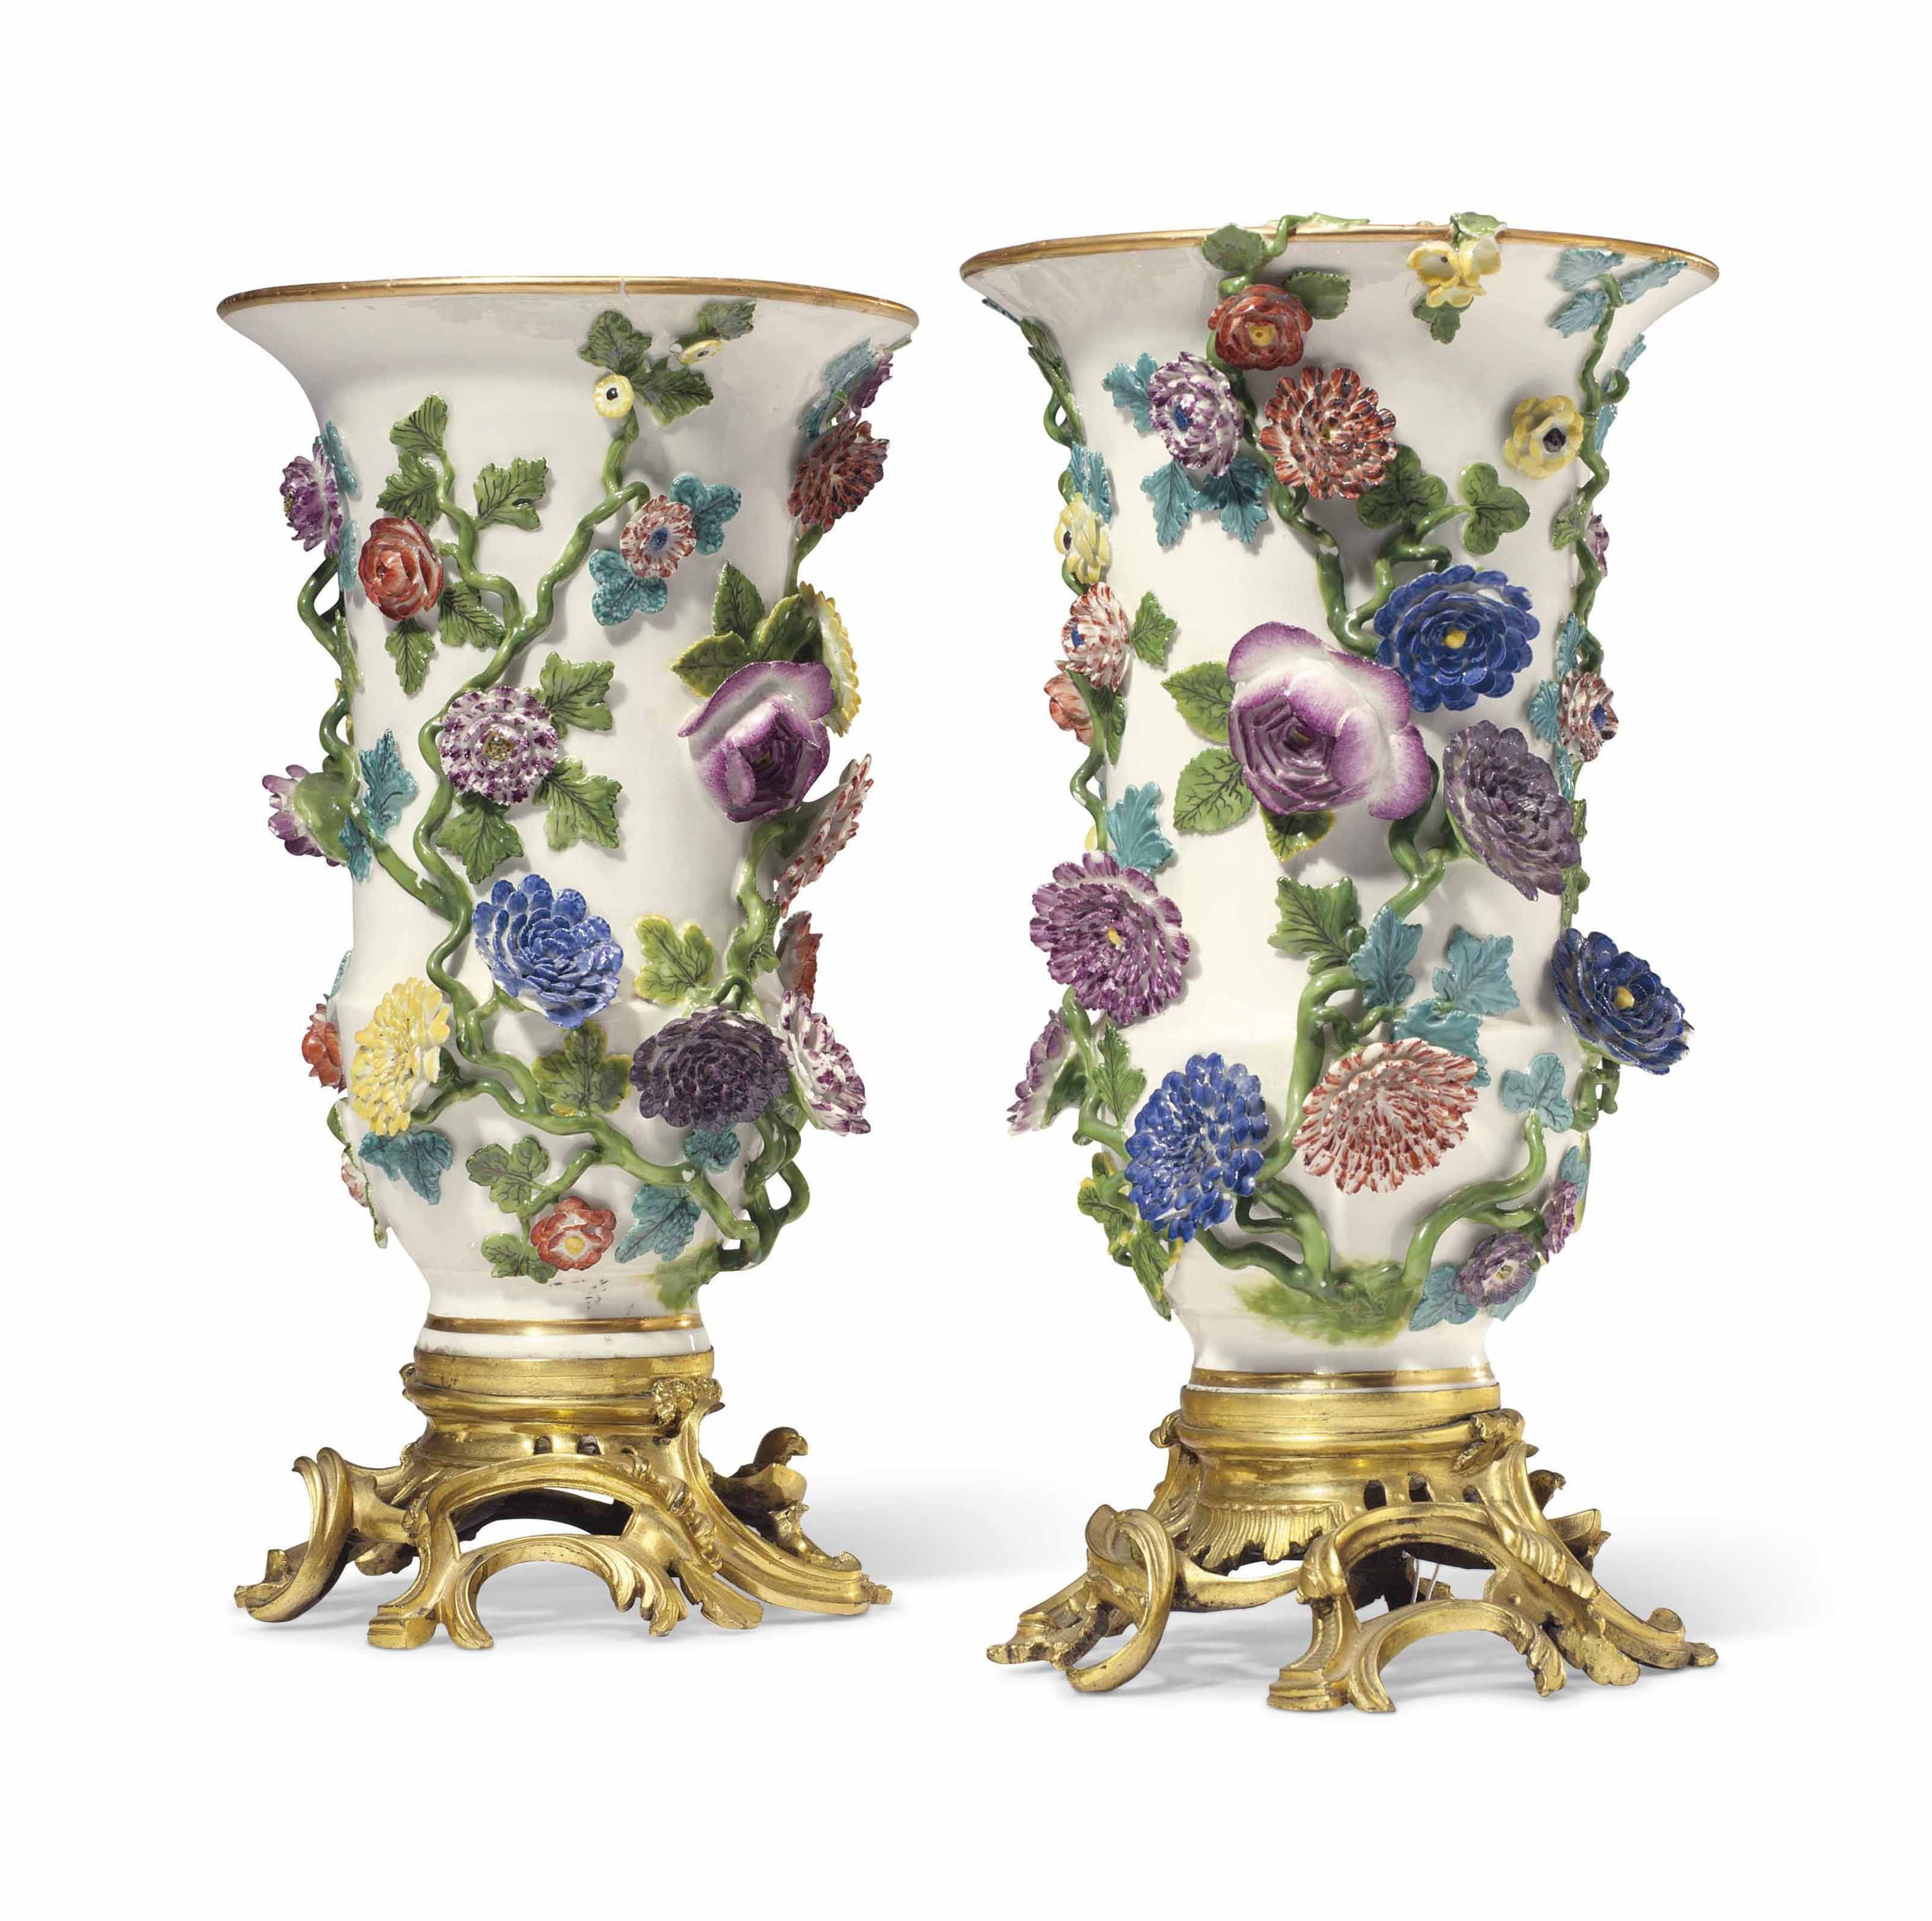 24 Unique Large Silver Vases Urns 2024 free download large silver vases urns of 23 crystal beaded vase the weekly world with a pair of ormolu mounted meissen porcelain flower encrusted vases